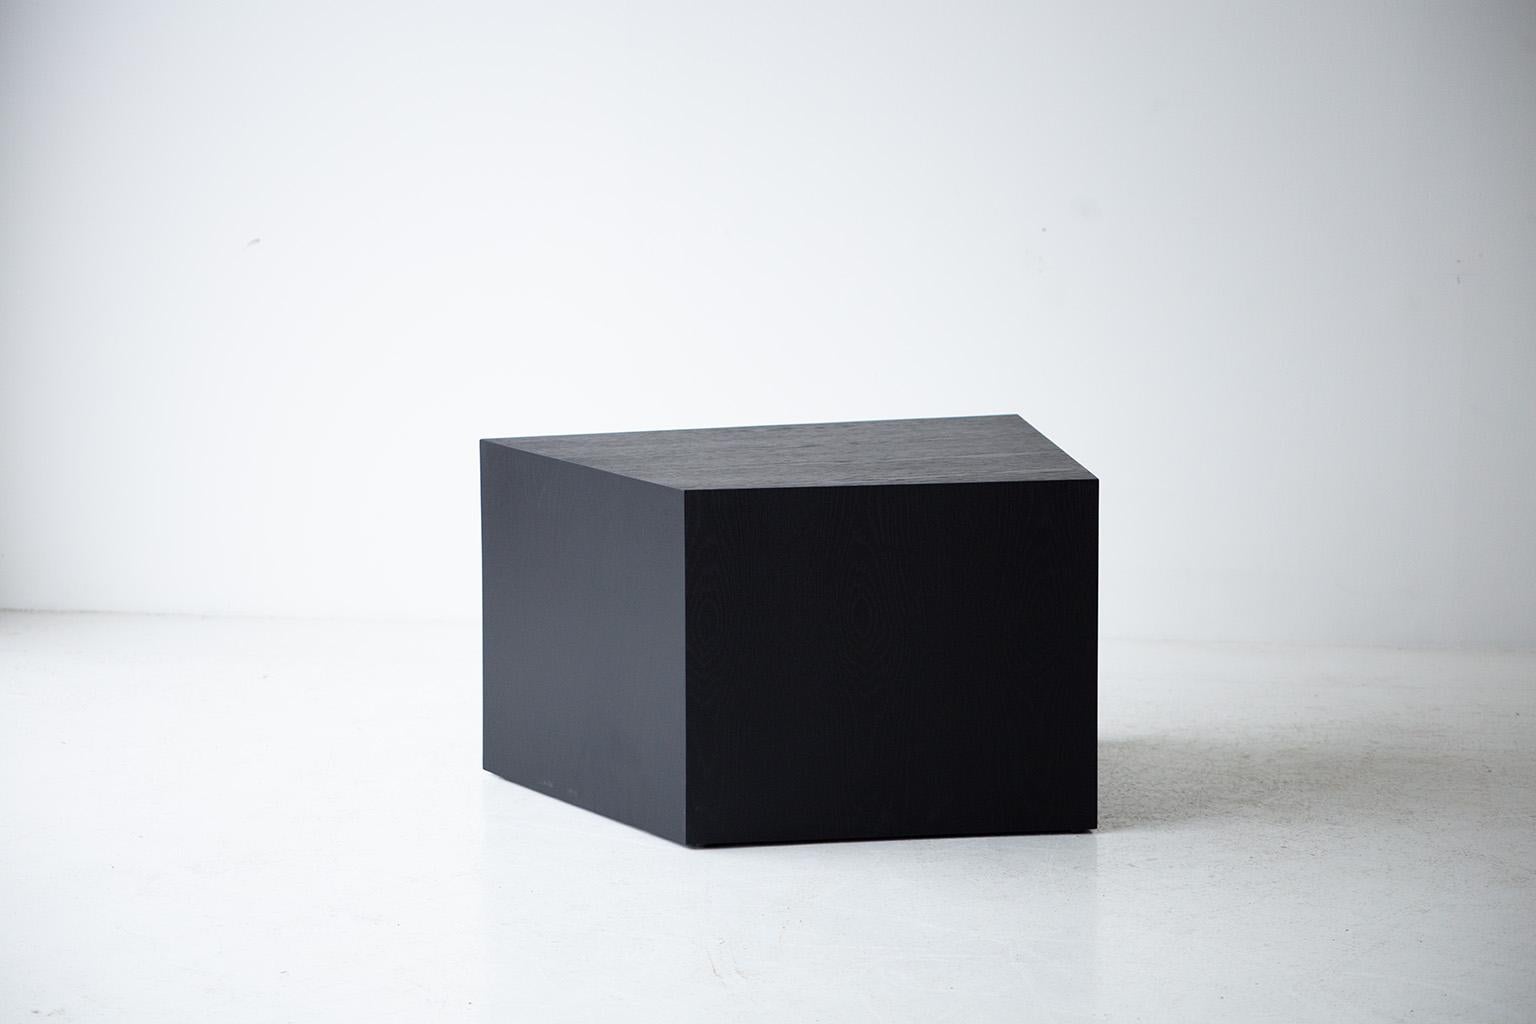 Modern coffee table - The crag tables- 1422

This Modern coffee table - The Crag Tables are made in the heart of Ohio with locally sourced wood. Each table is a hand-made mitered box from white oak veneer and finished with a beautiful matte black